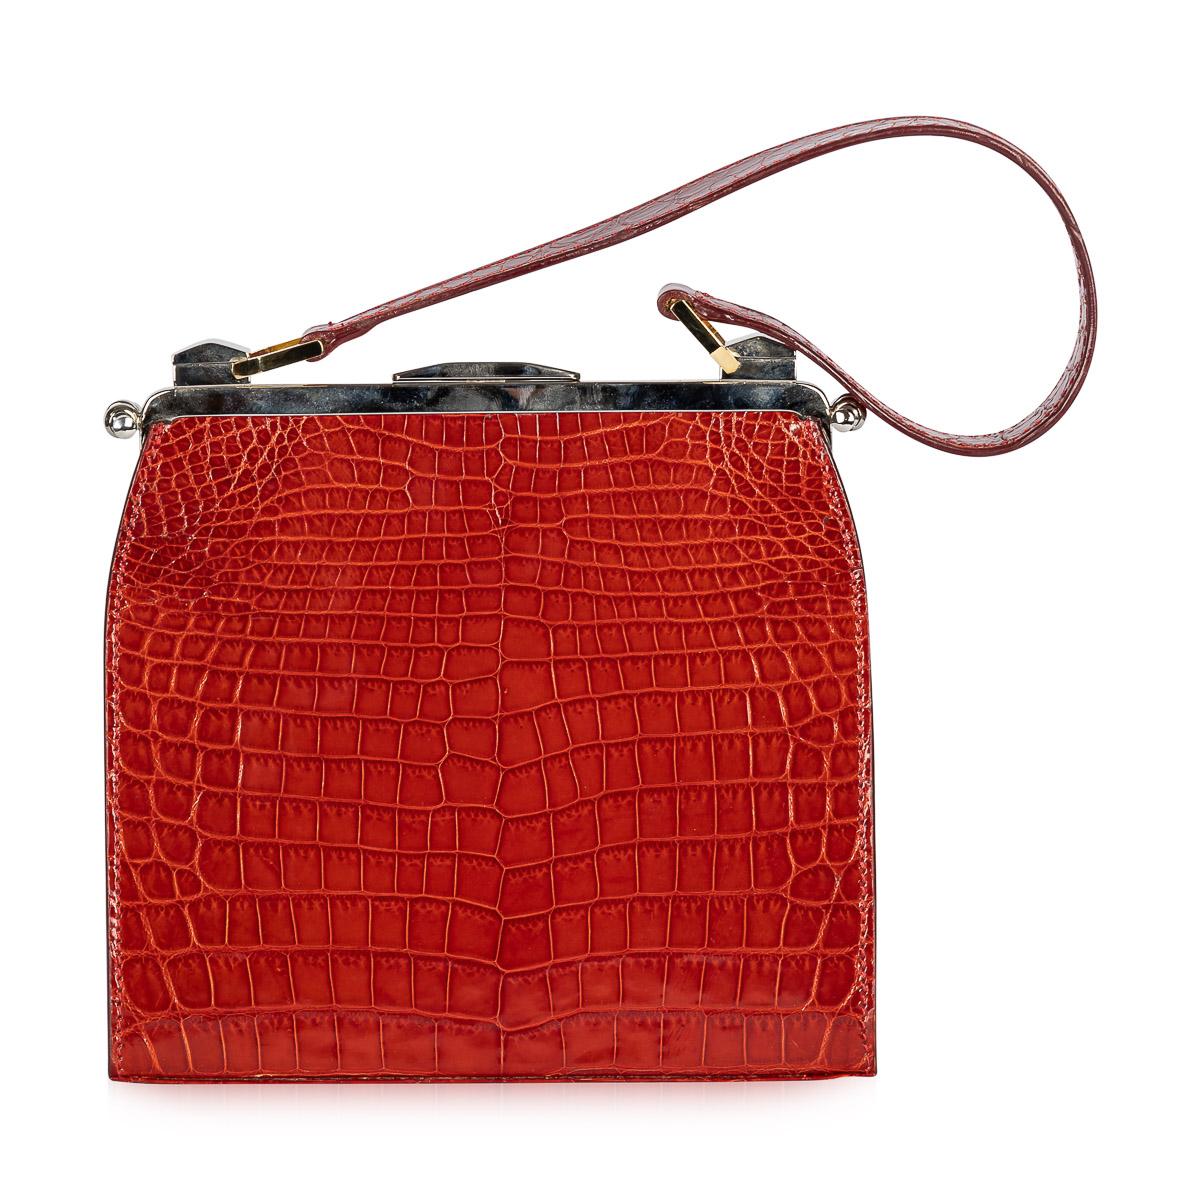 Other Pre - Loved Dotti Red Crocodile Leather Handbag c.2000 For Sale